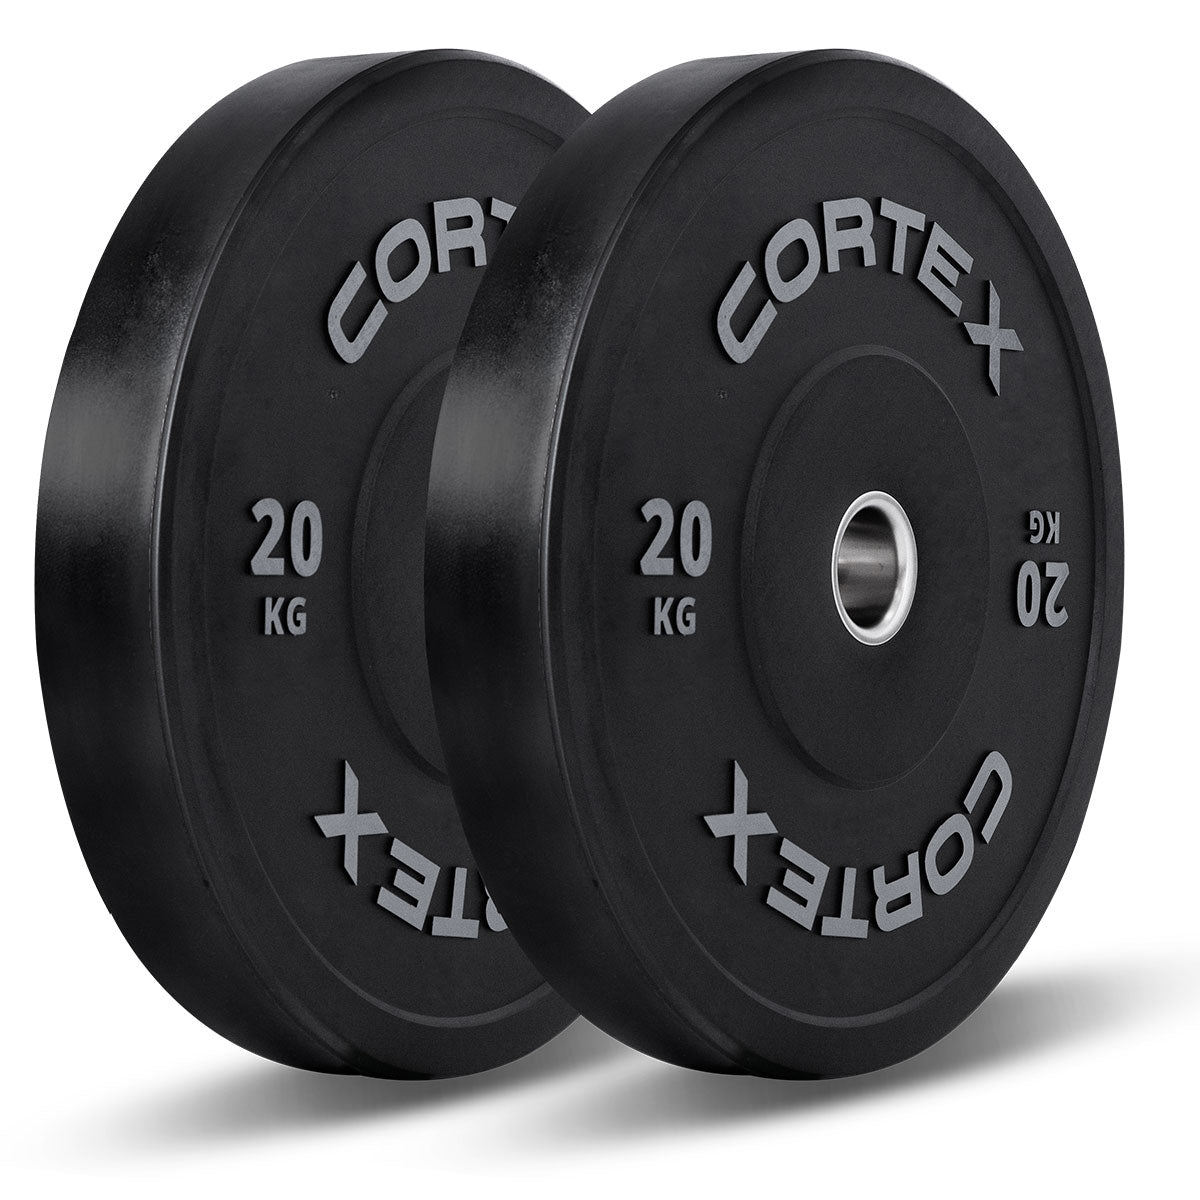 CORTEX SM-25 6-in-1 Power Rack with Smith &amp; Cable Machine + BN6 Bench + 130kg Olympic Weight Plate &amp; Barbell Package